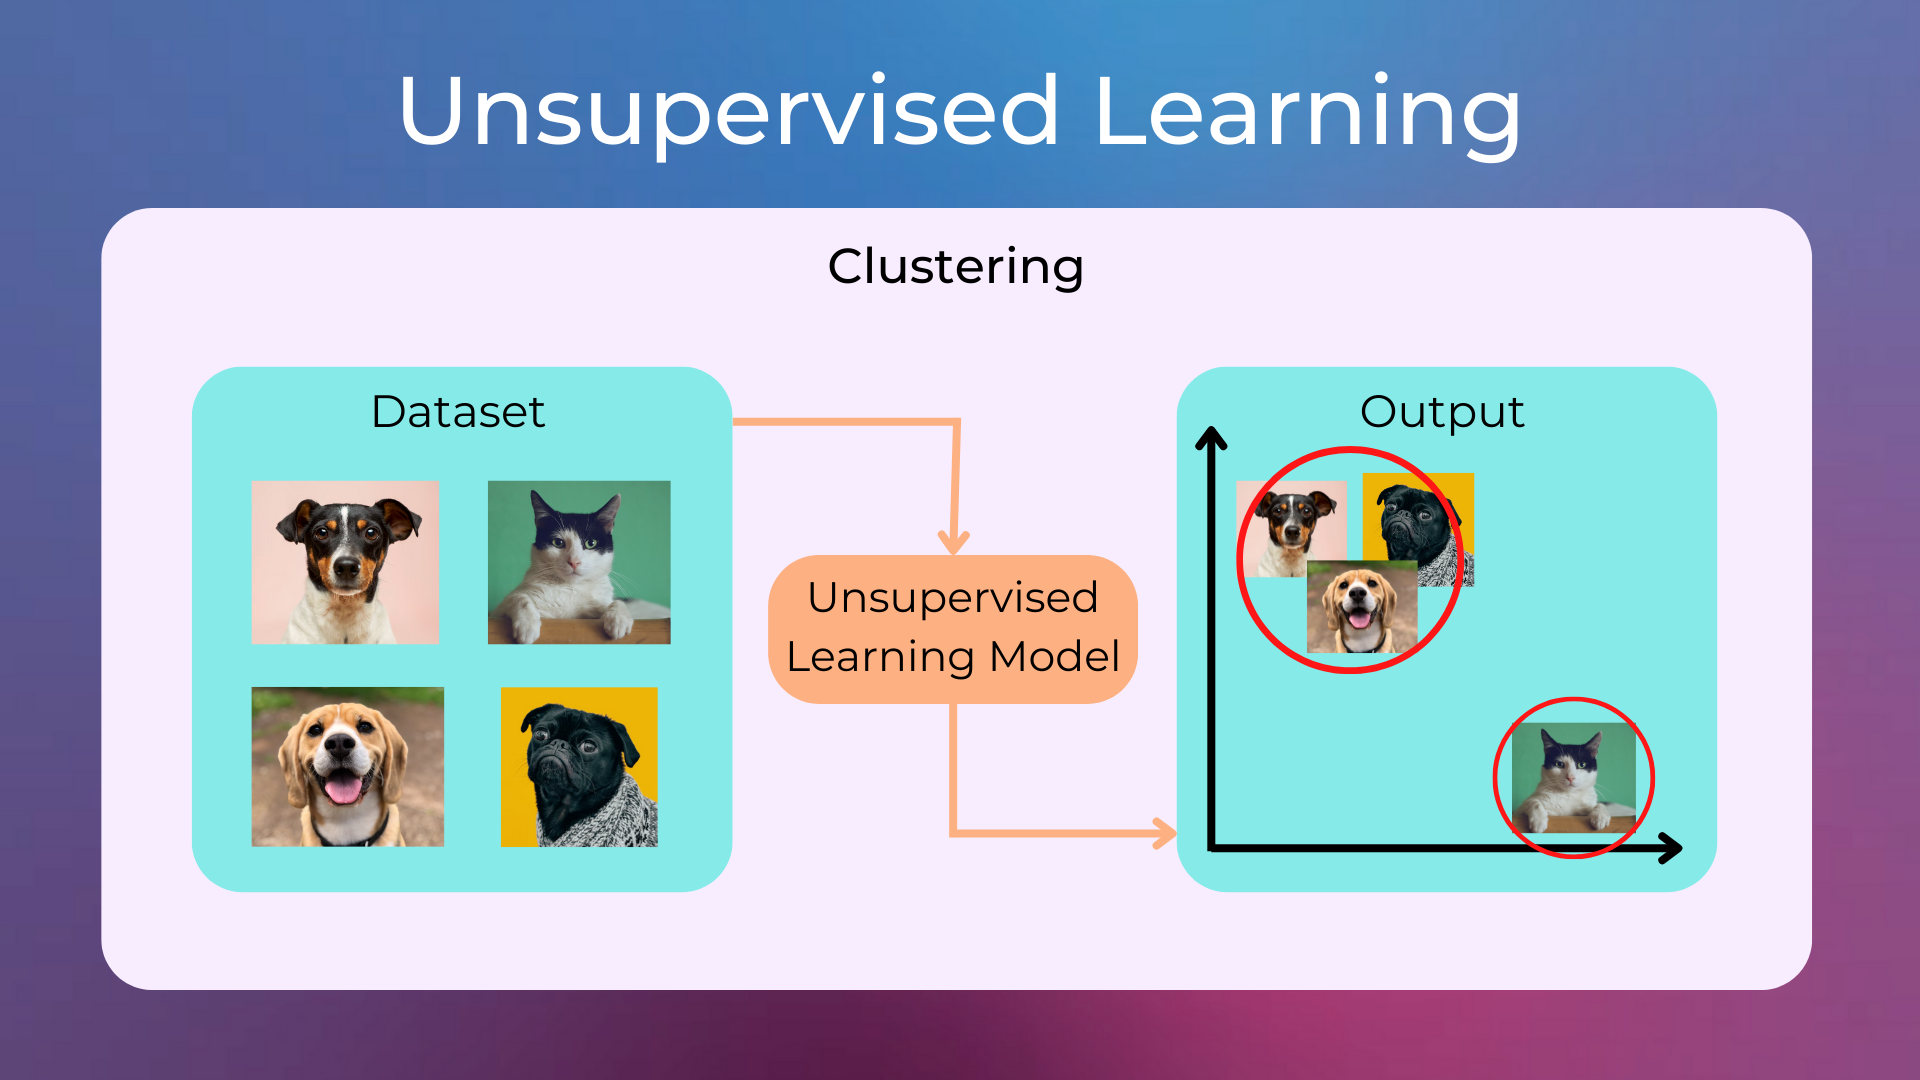 _images/unsupervised_learning.png